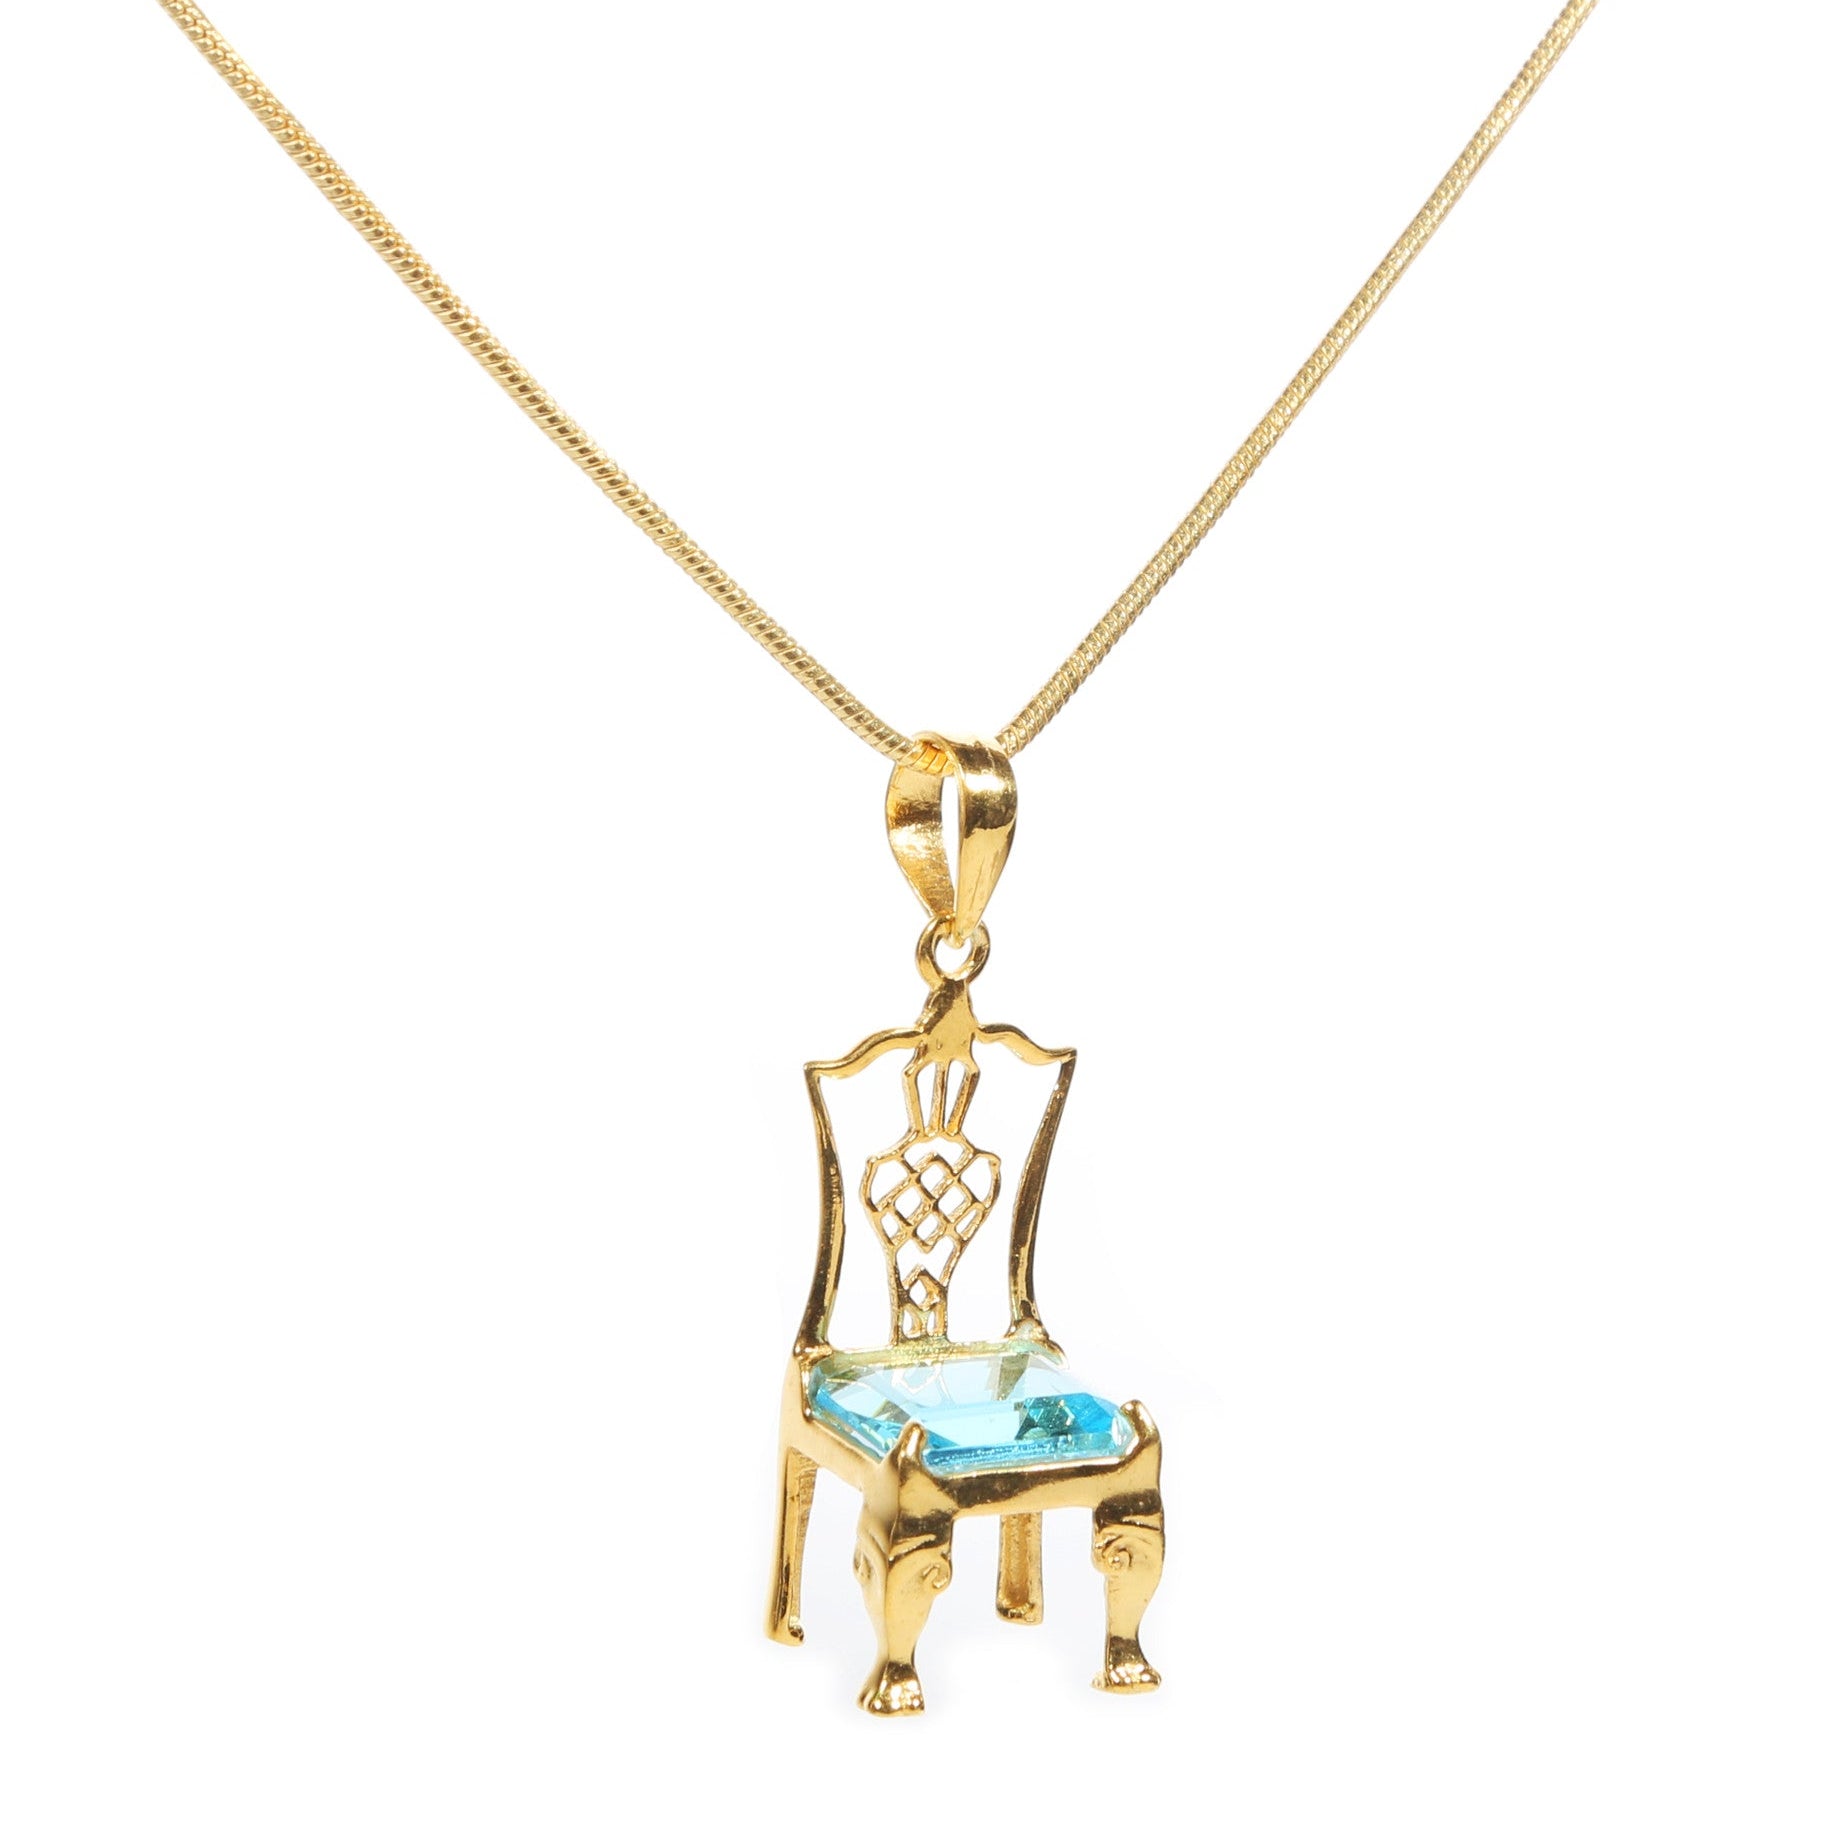 Your Choice of Birthstone Chair on Gold Necklace - Carleton Varney